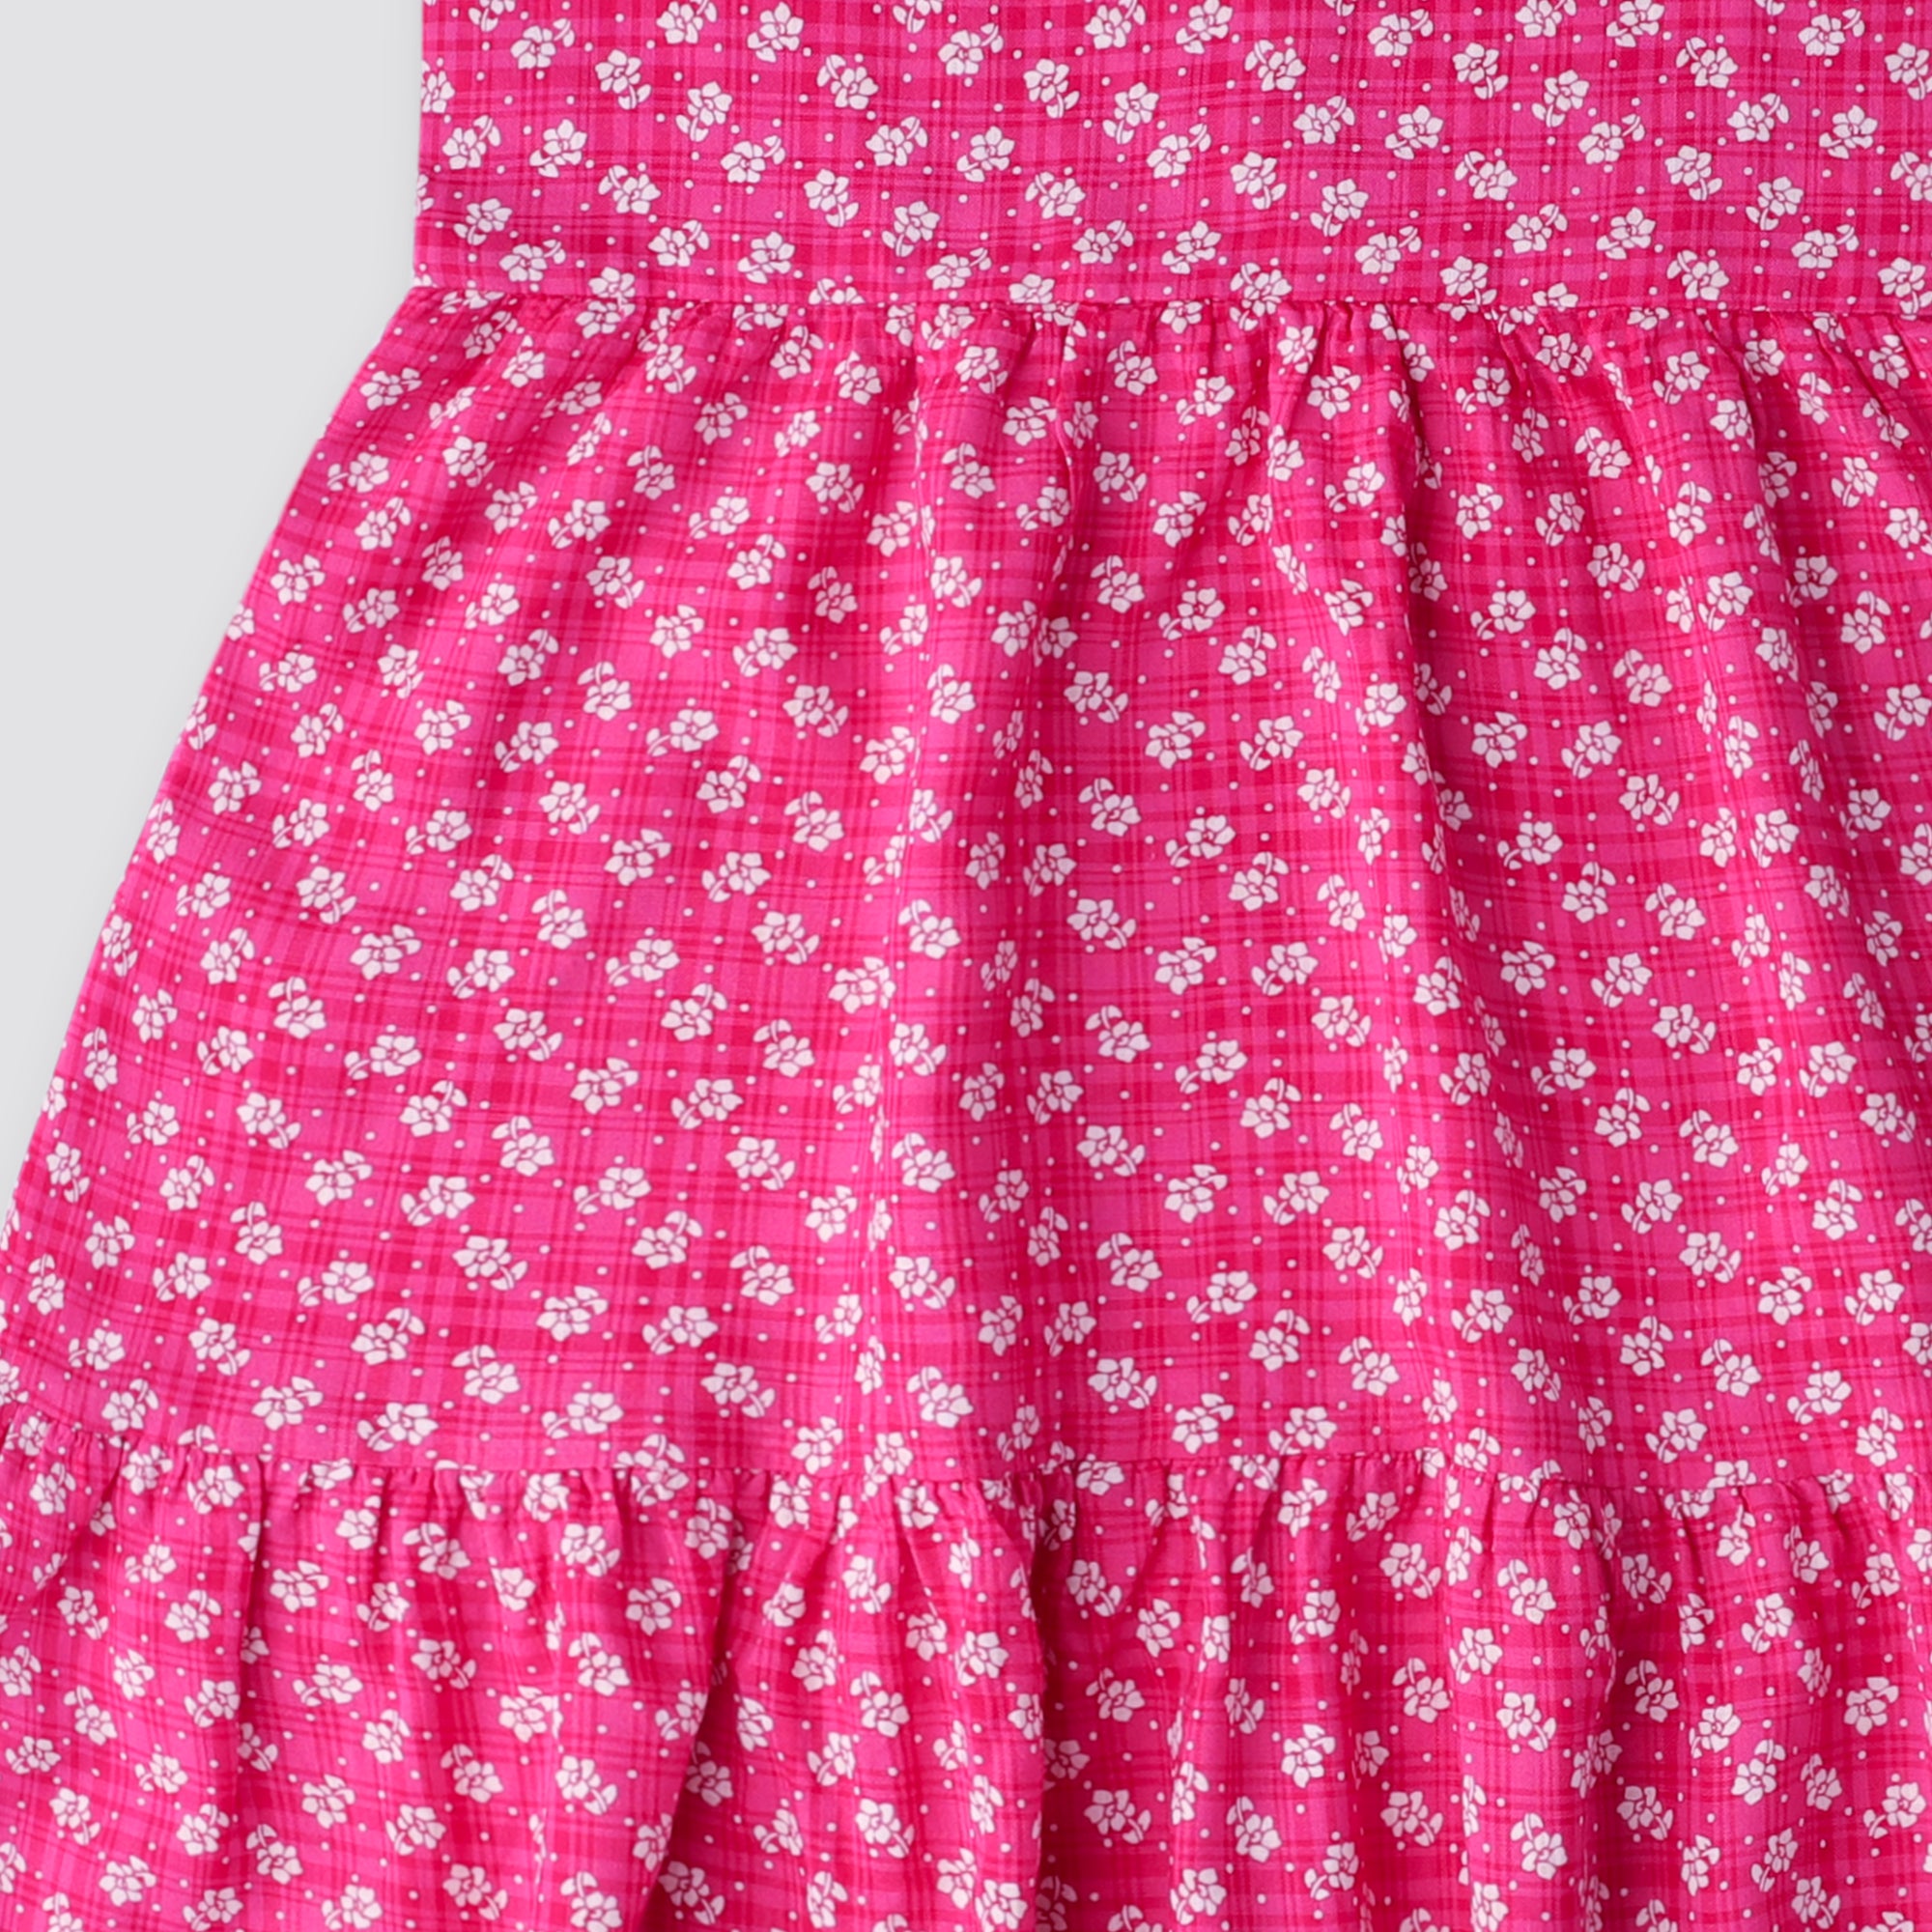 Hot Pink Floral Printed Summer Frock with Ruffles